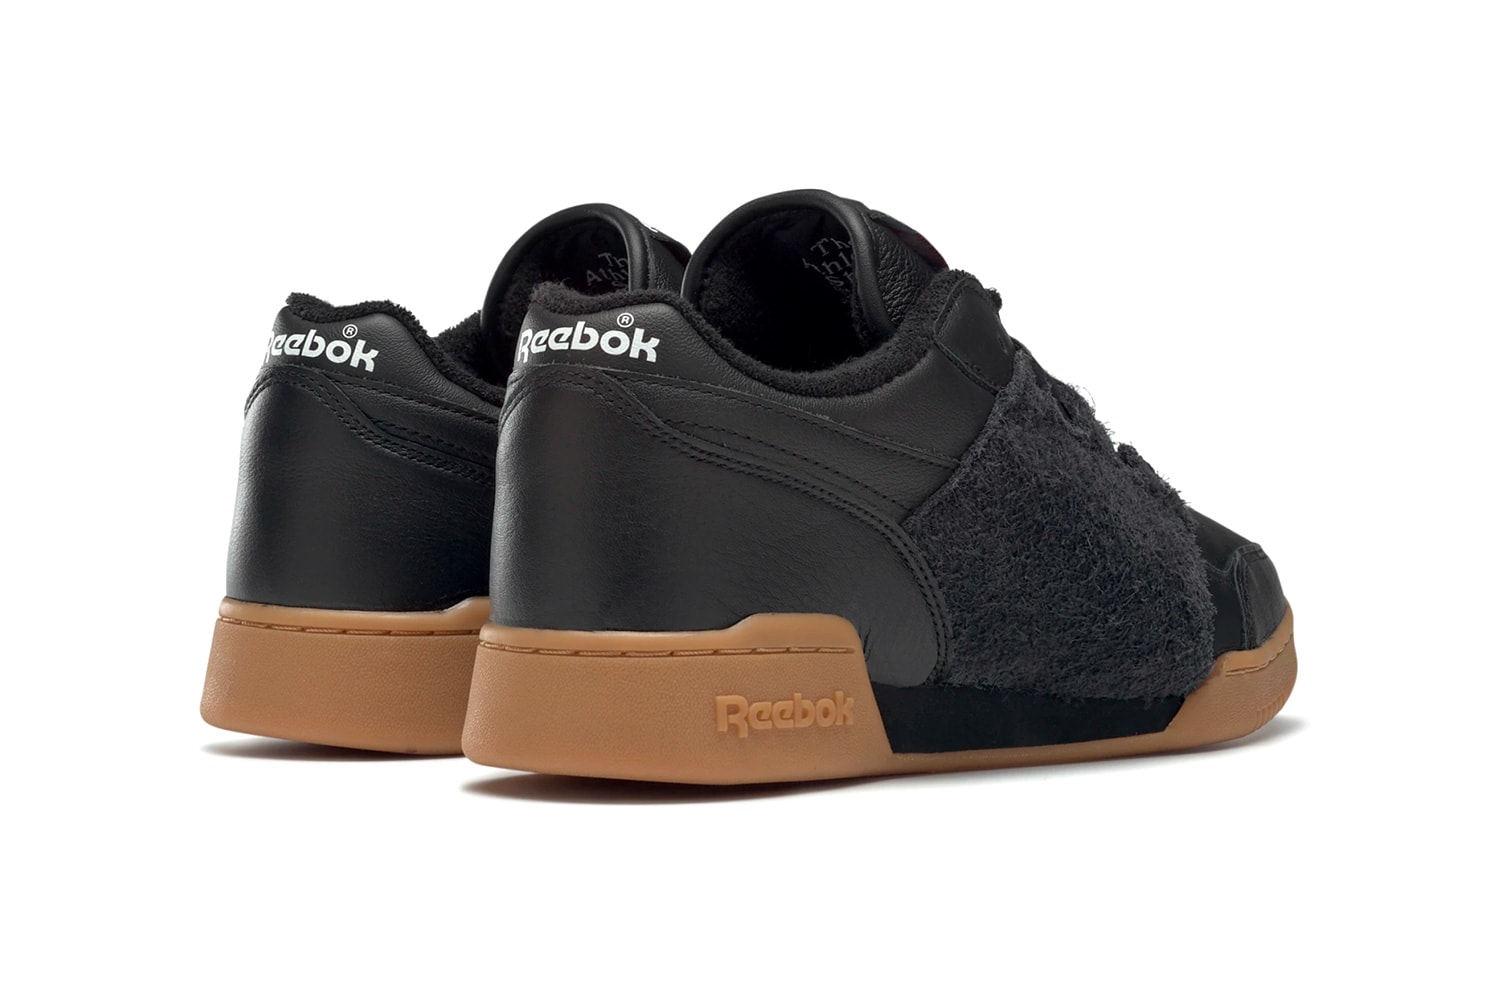 NEPENTHES NY x Reebok Workout Plus "Black/Gum" collaboration sneaker shoe red  FW8461 eva cushion sole suede crossgrain tumbled leather  price drop date release info 